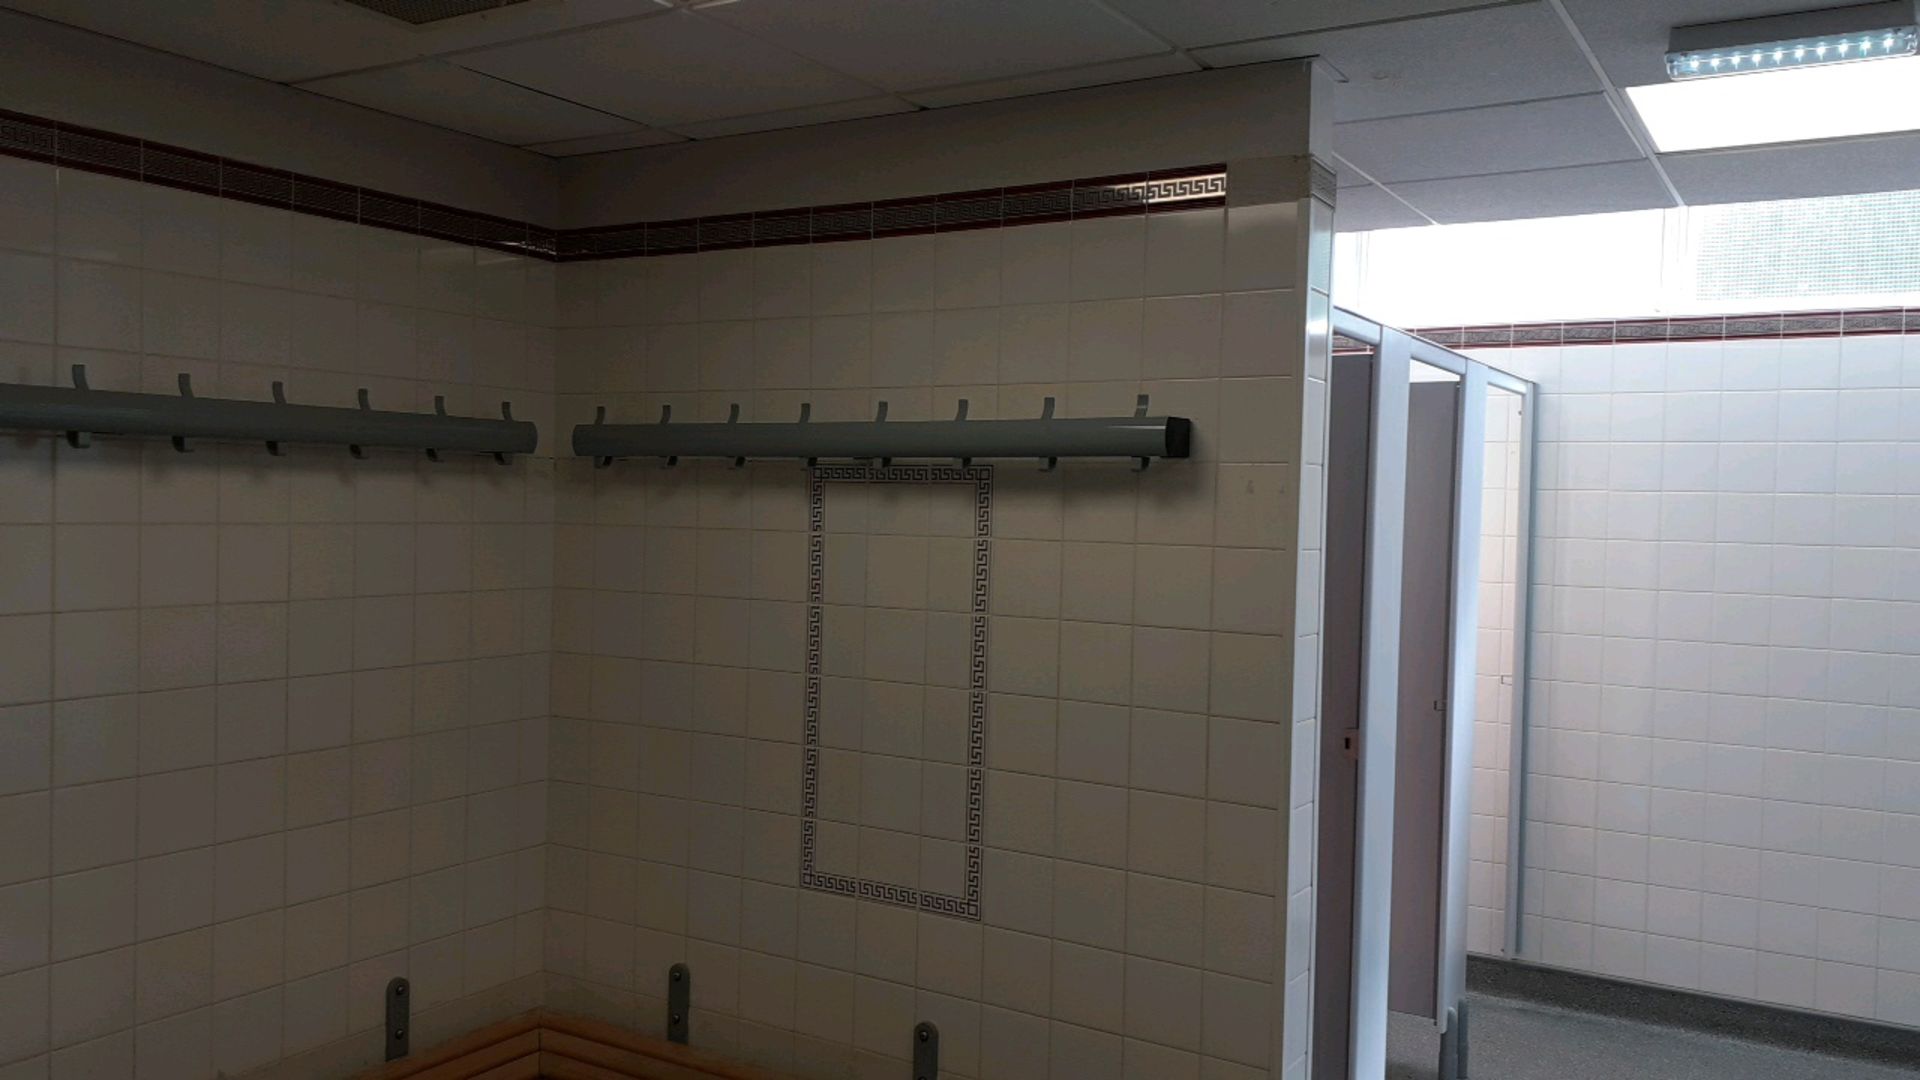 Male changing rooms - Image 6 of 8